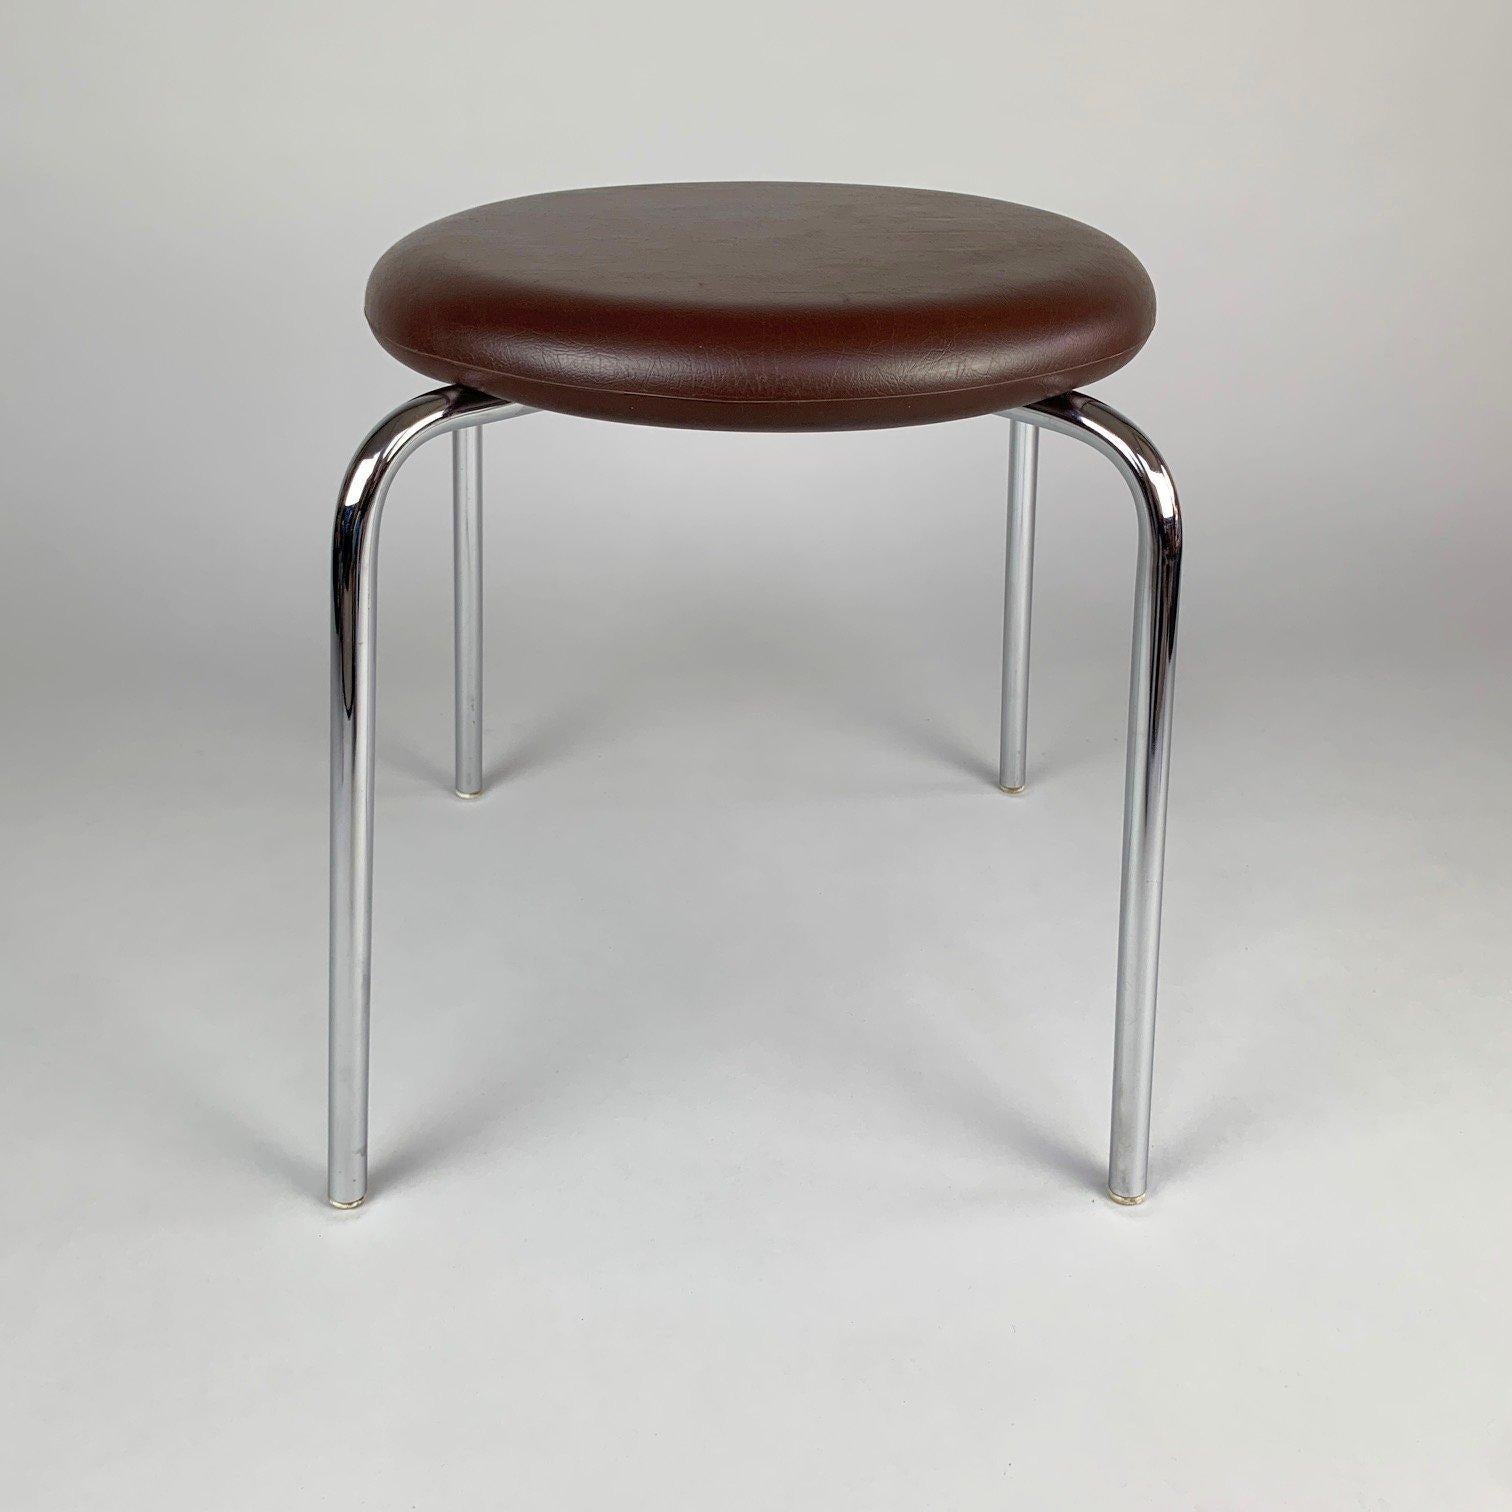 Vintage chrome and artificial leather stool from former Czechoslovakia. Some signs of use on the leatherette, see photo.